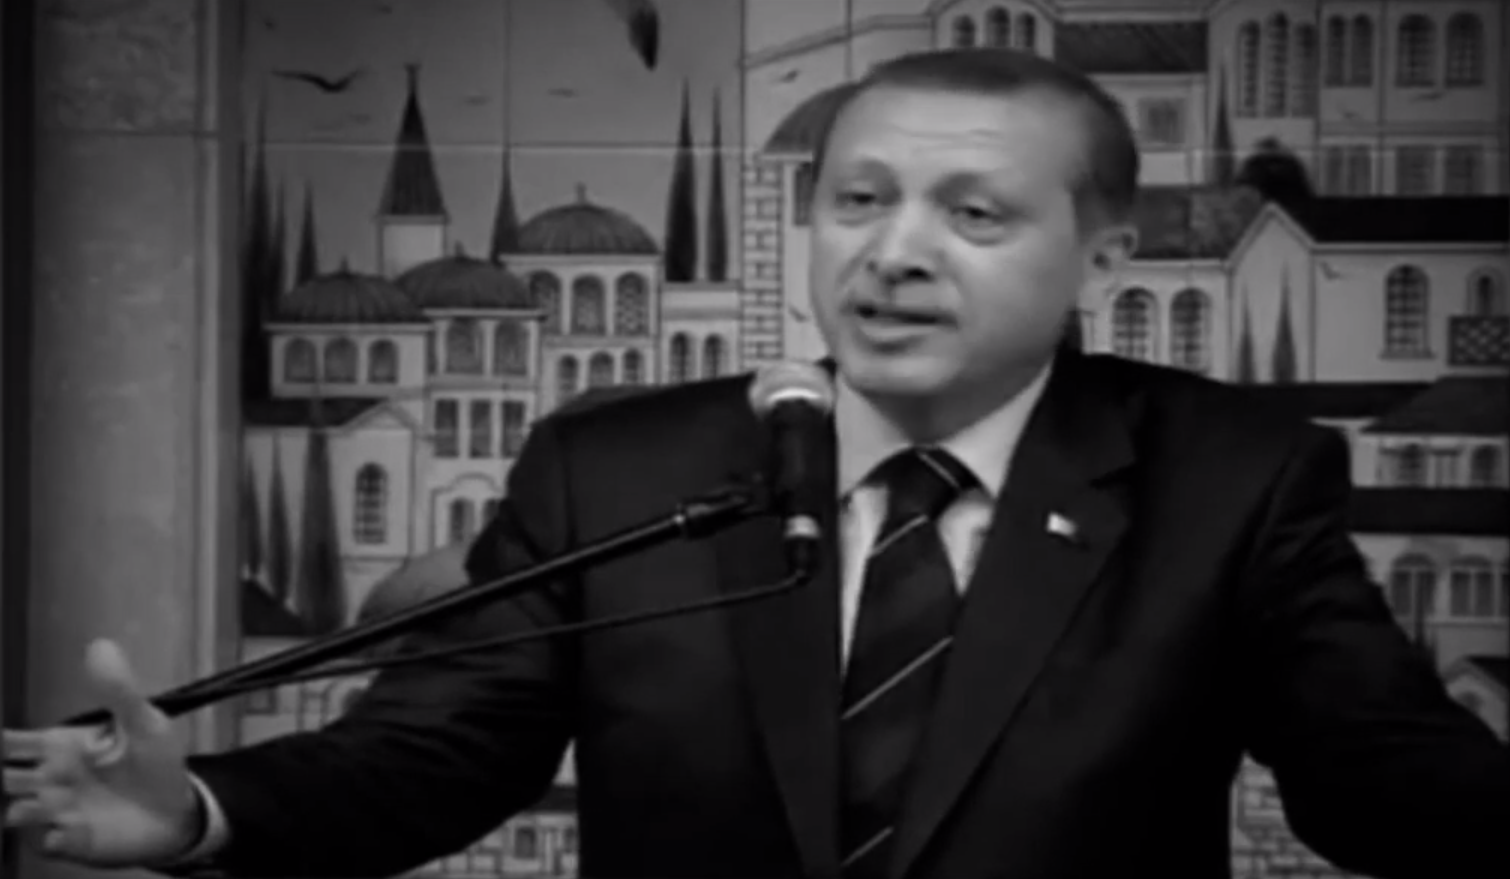 Turkey's prime minister has denounced Israel repeatedly. Screenshot from video uploaded by YouTube user Tamerscadence